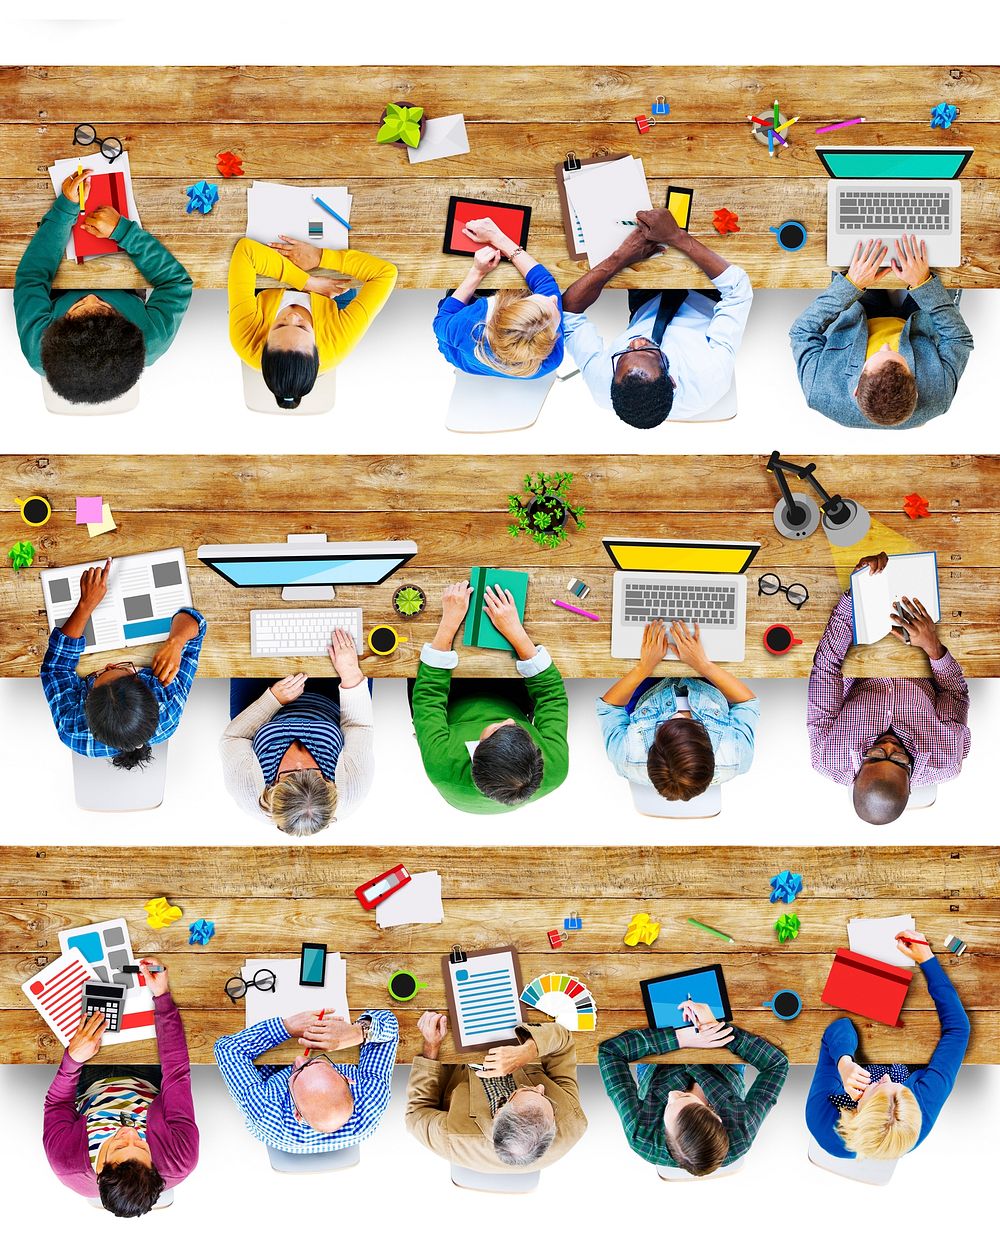 Group of People Using Digital Devices in Photo and Illustration